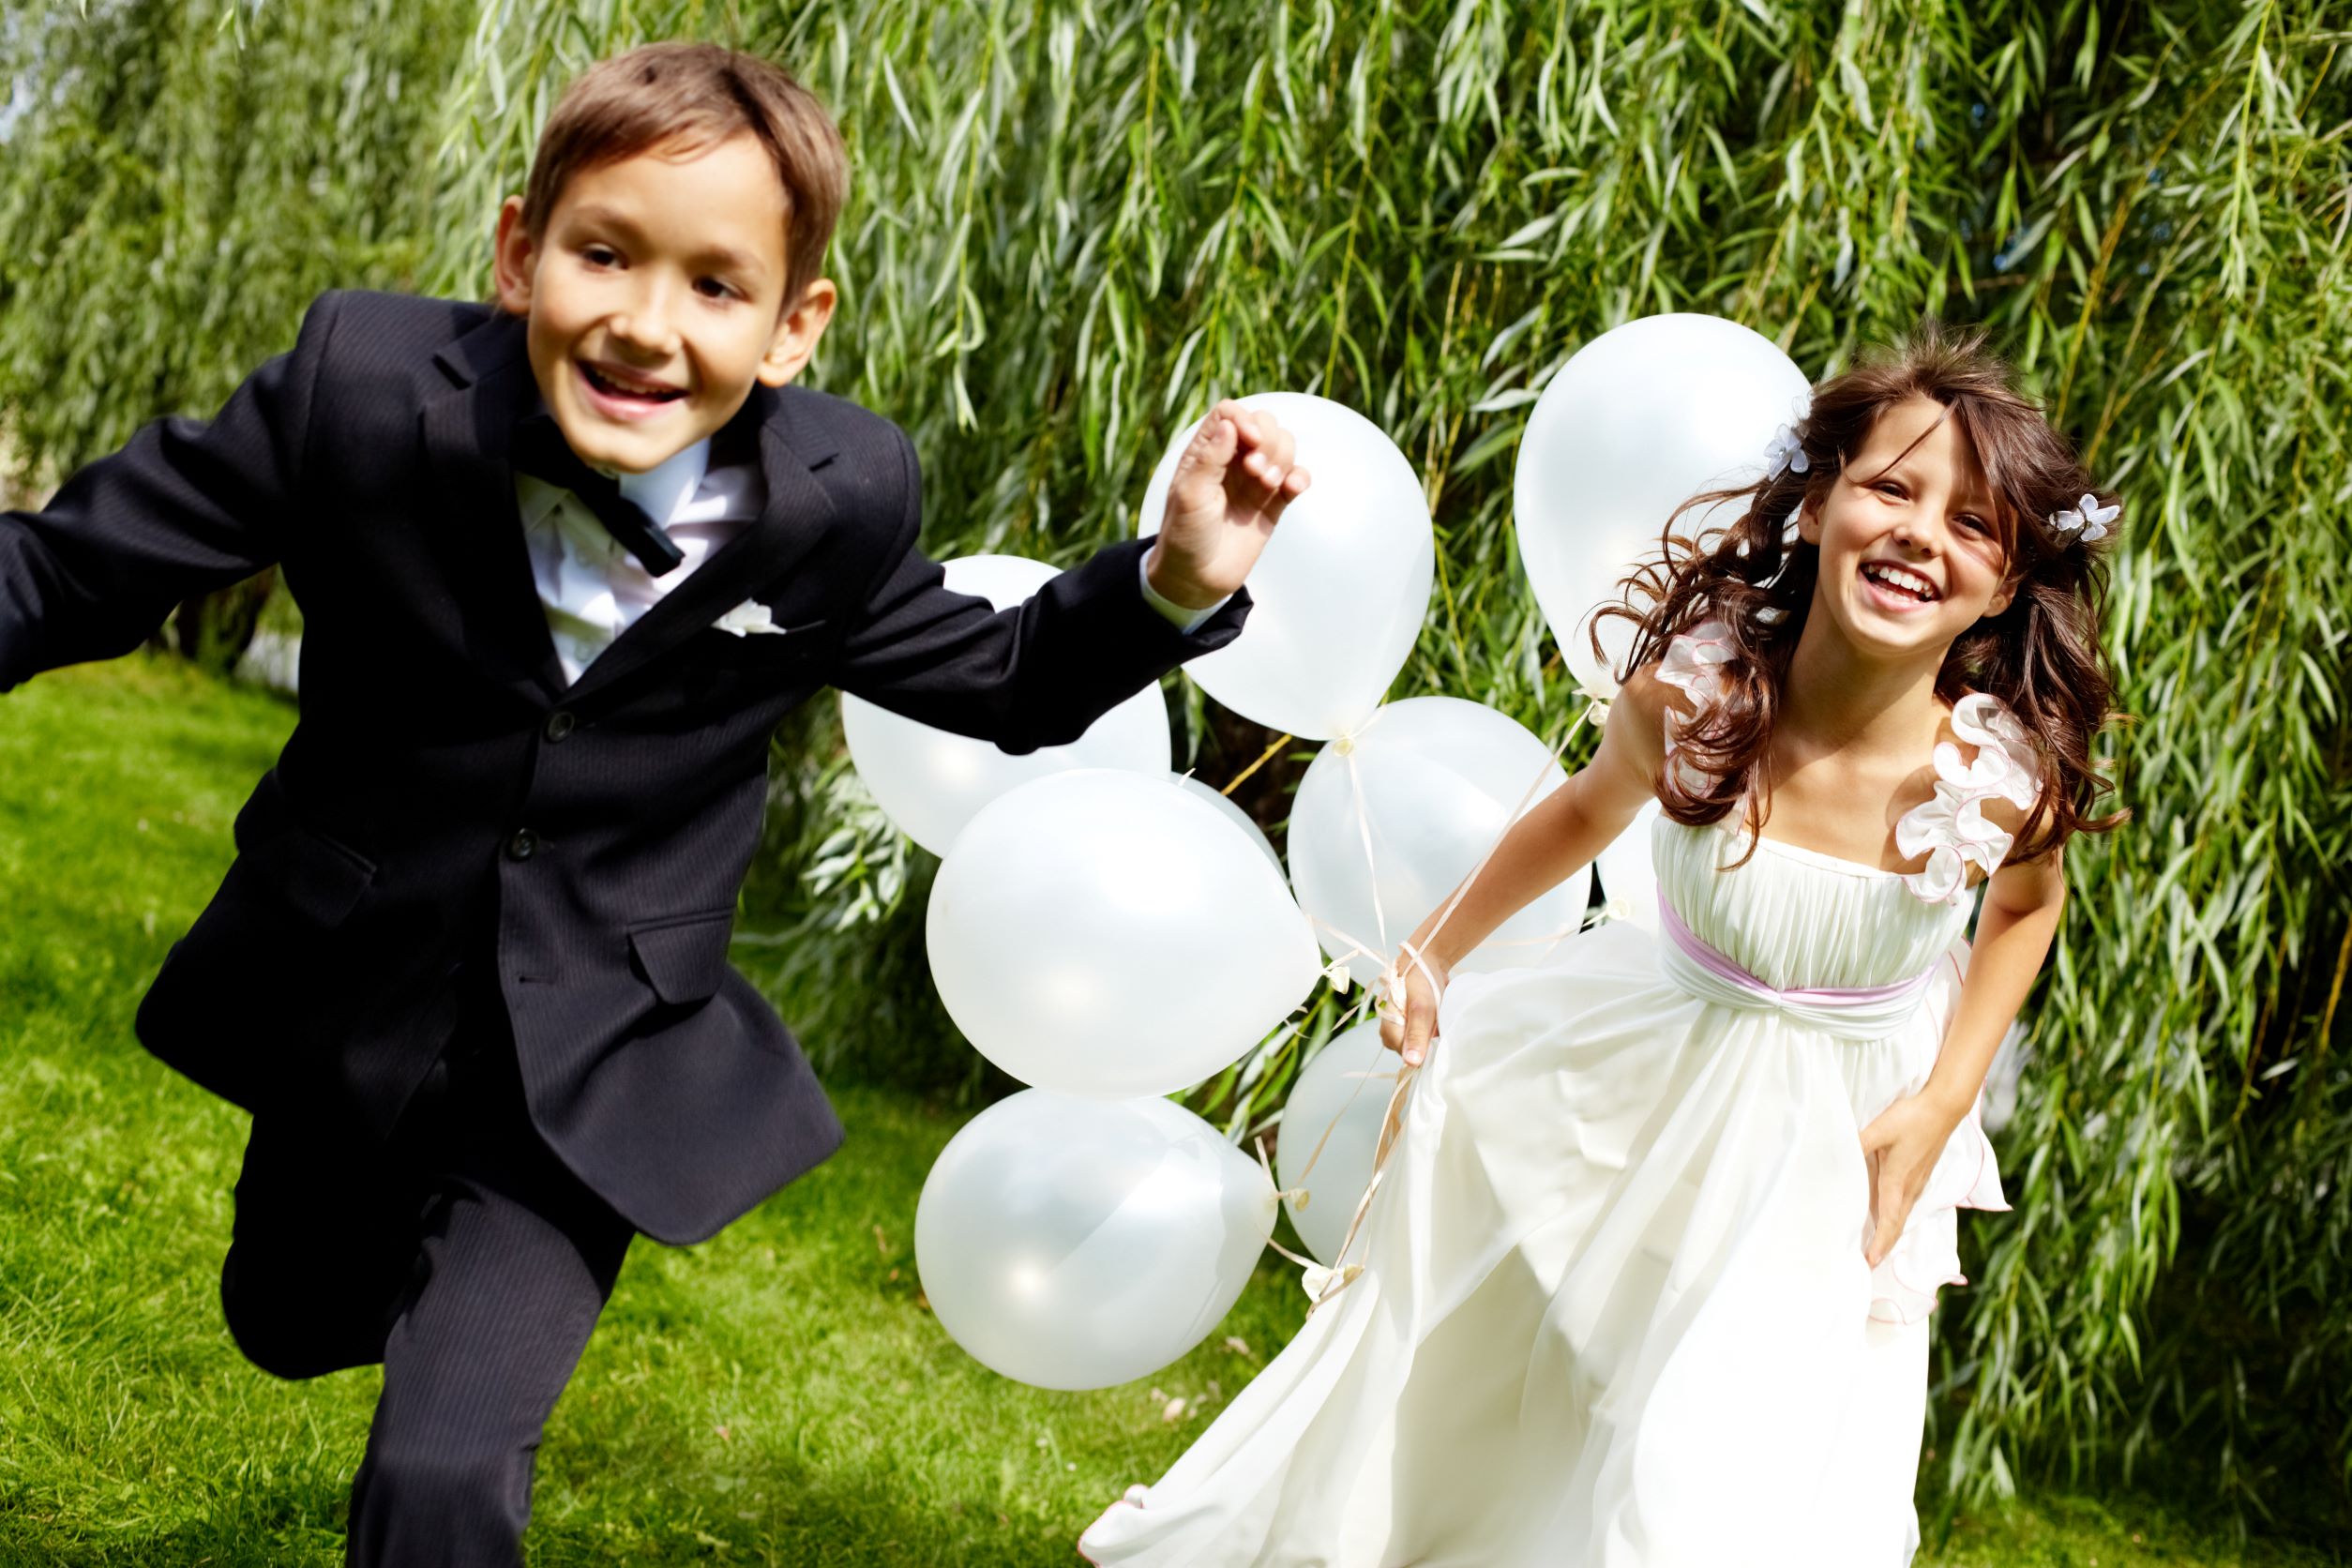 little boy in black tux being chased by little girl in flower dress holding white balloons